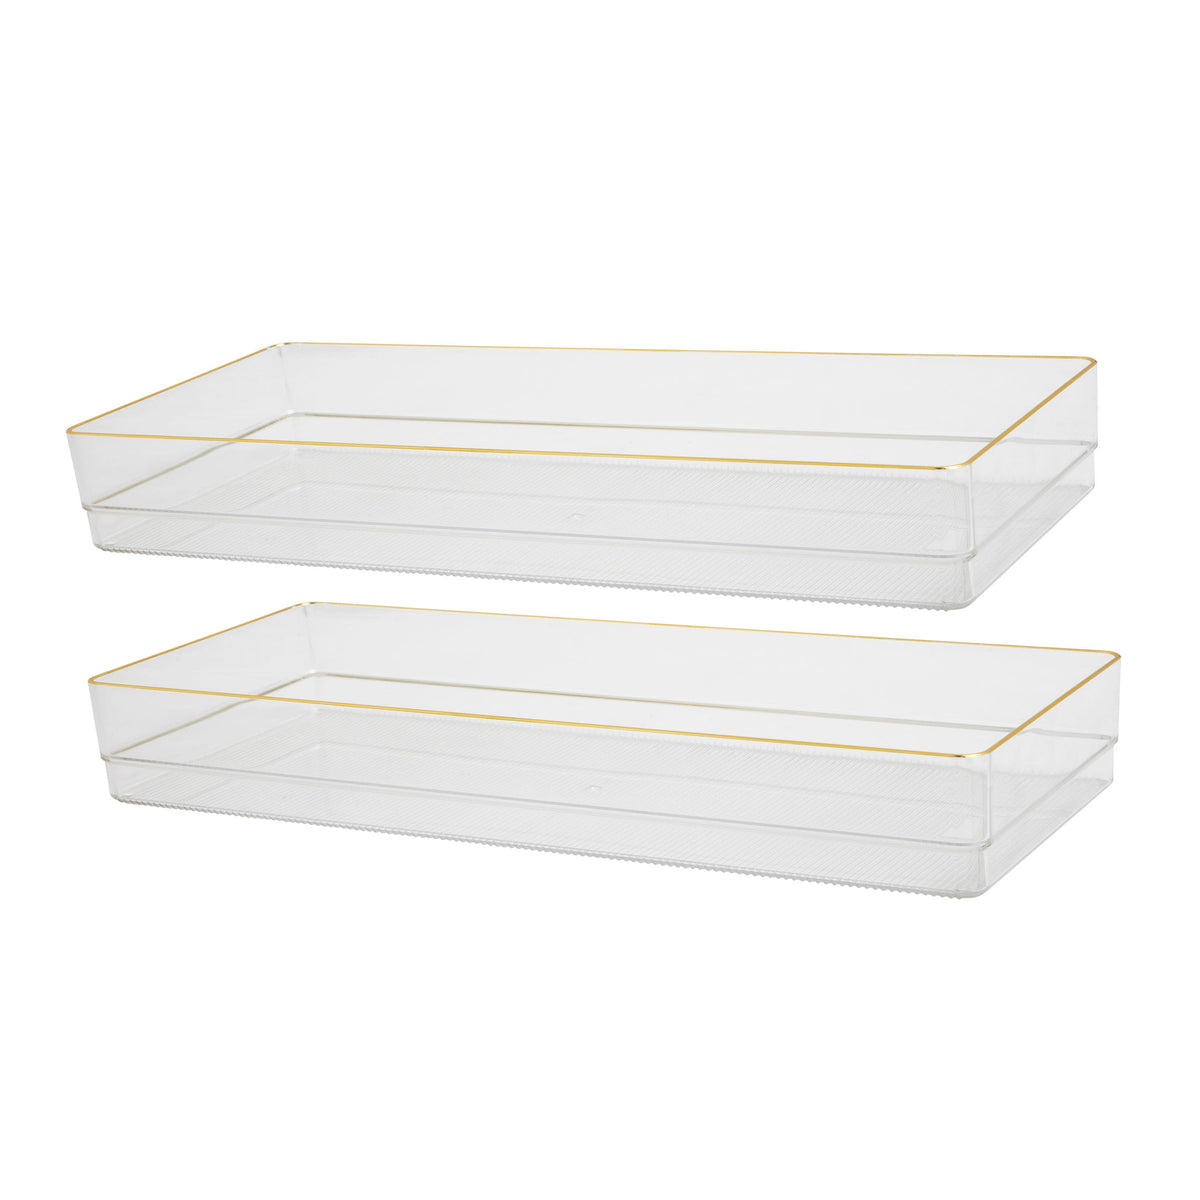 Set of 2 Plastic Stacking Desk Drawer Organizers with Gold Trim - 15 x 6